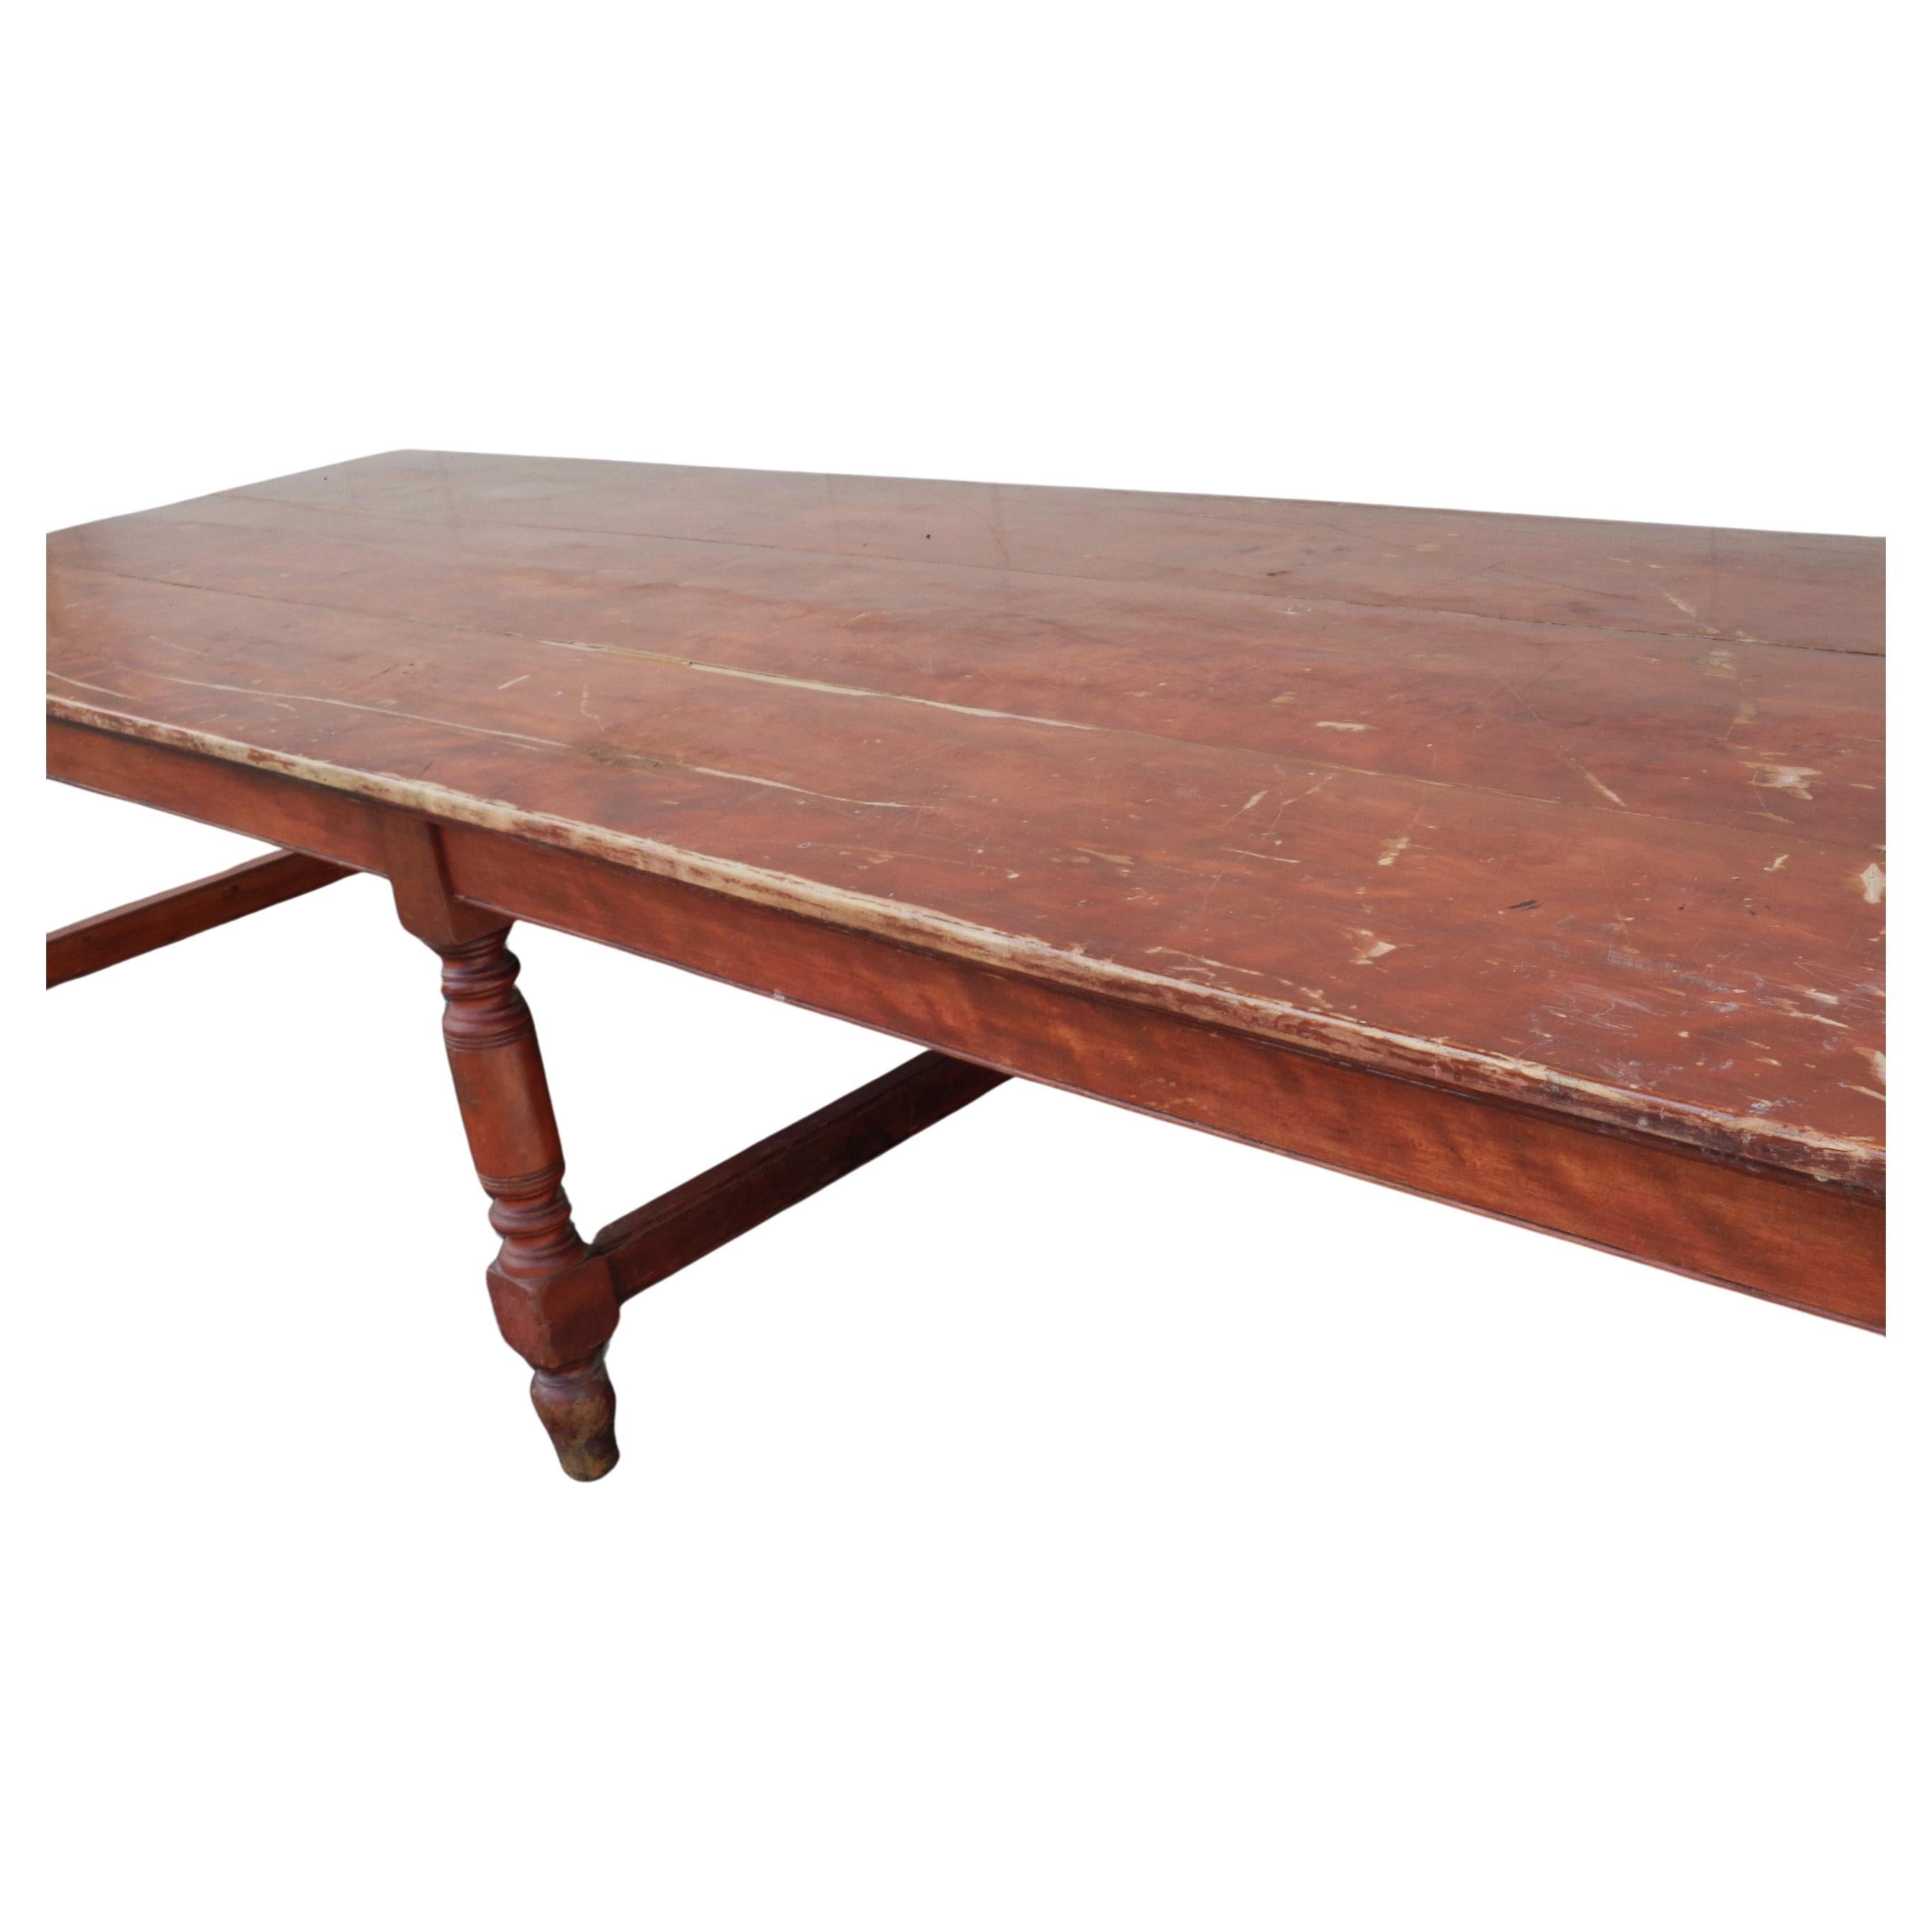 19th Century Antique American Banquet Dining Table, 1870-1880 For Sale